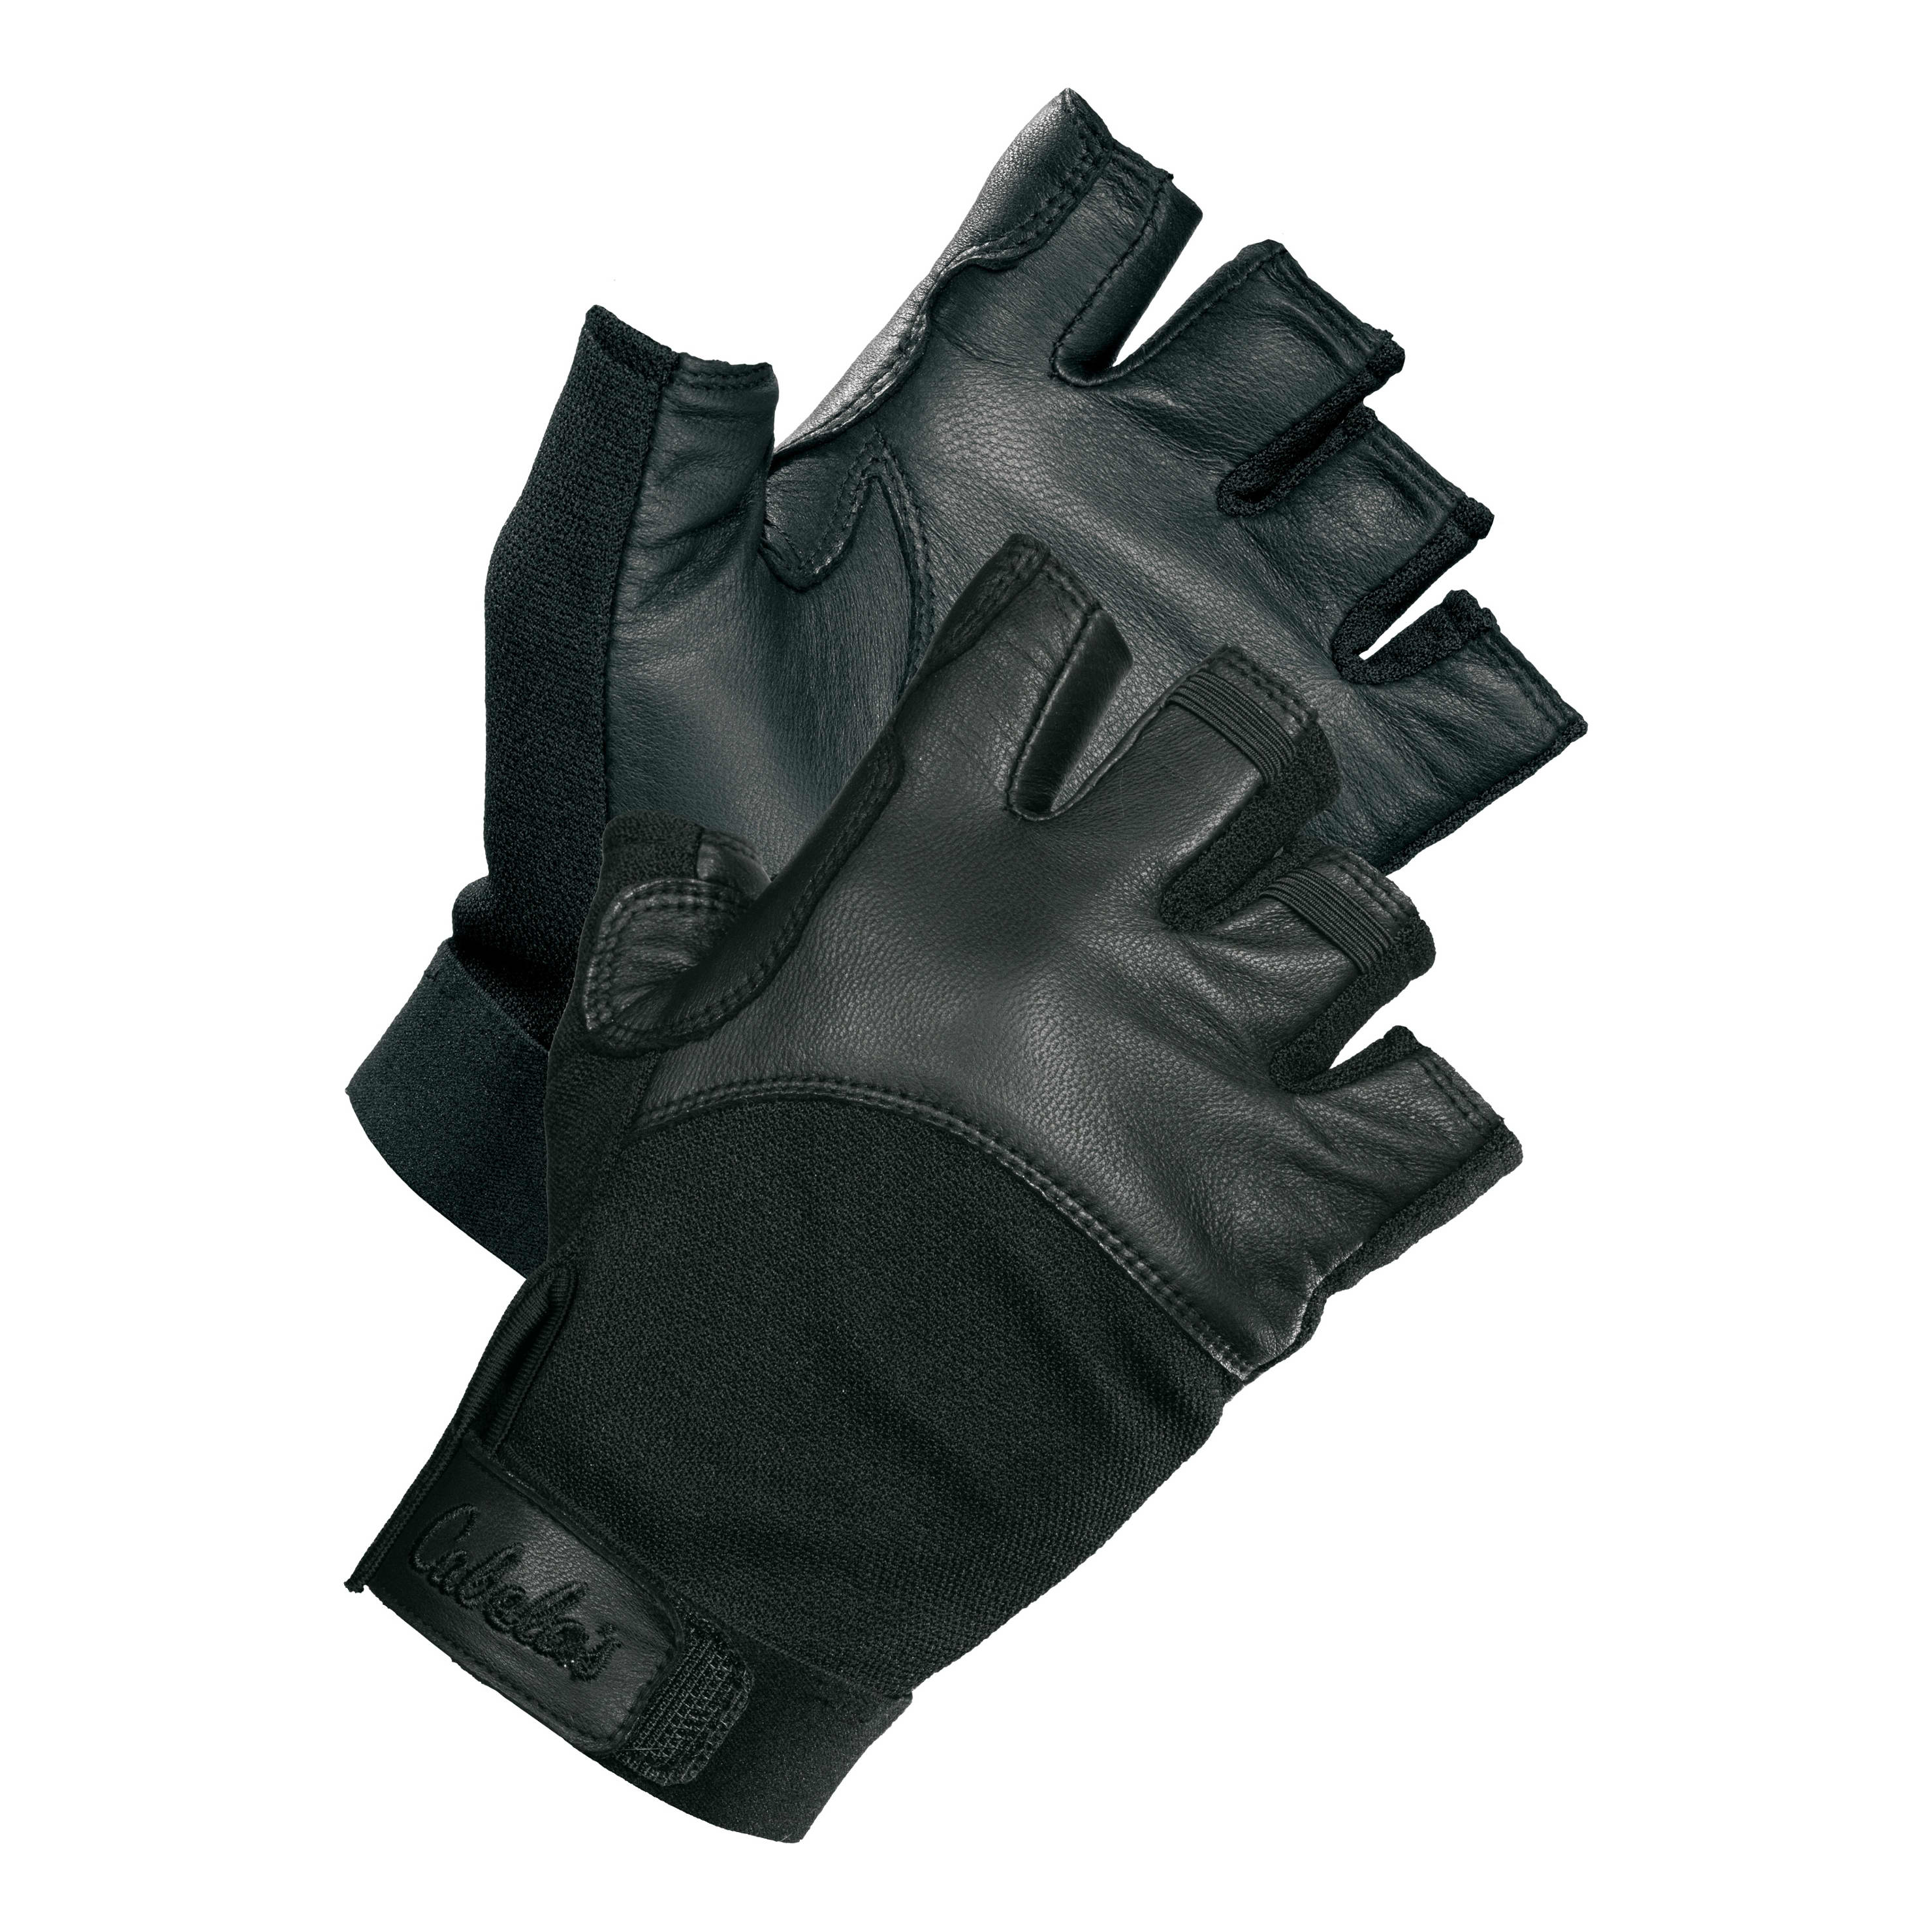 Grip Workout Gloves, Non-Slip Silicone Gloves Elasticated